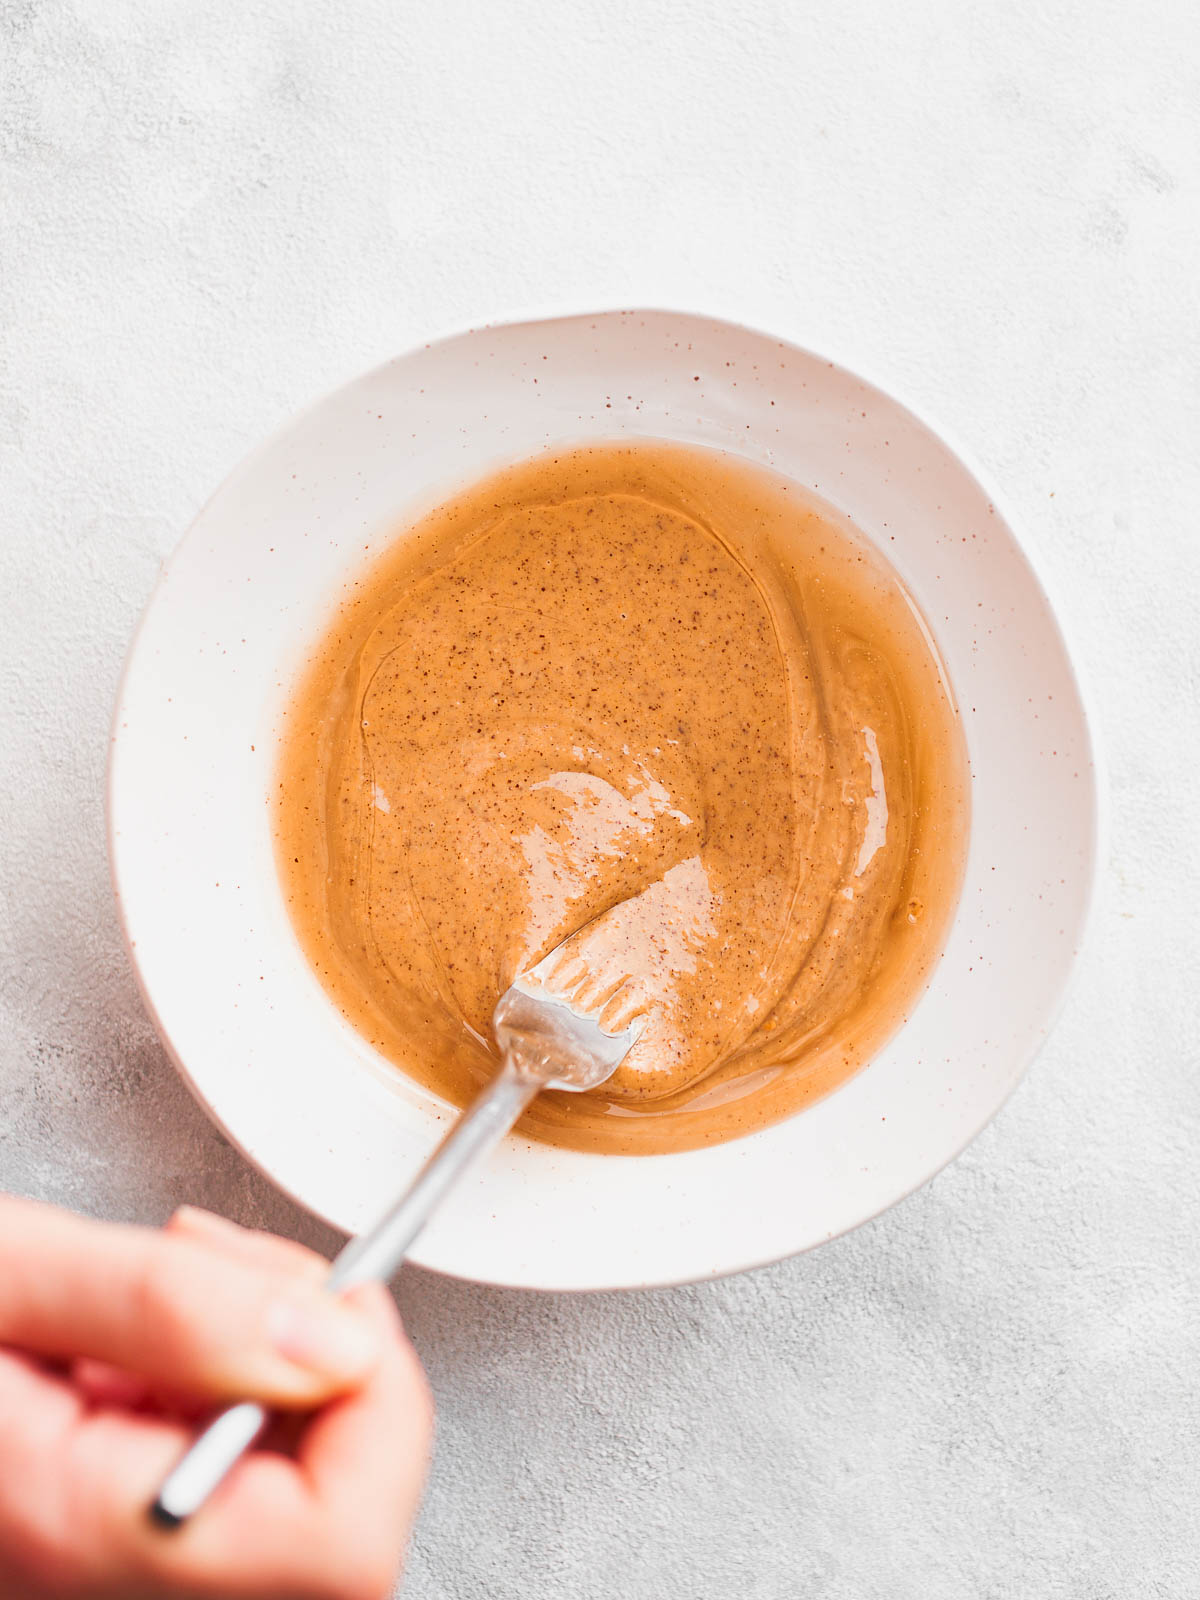 Whisking the peanut butter with the coconut oil